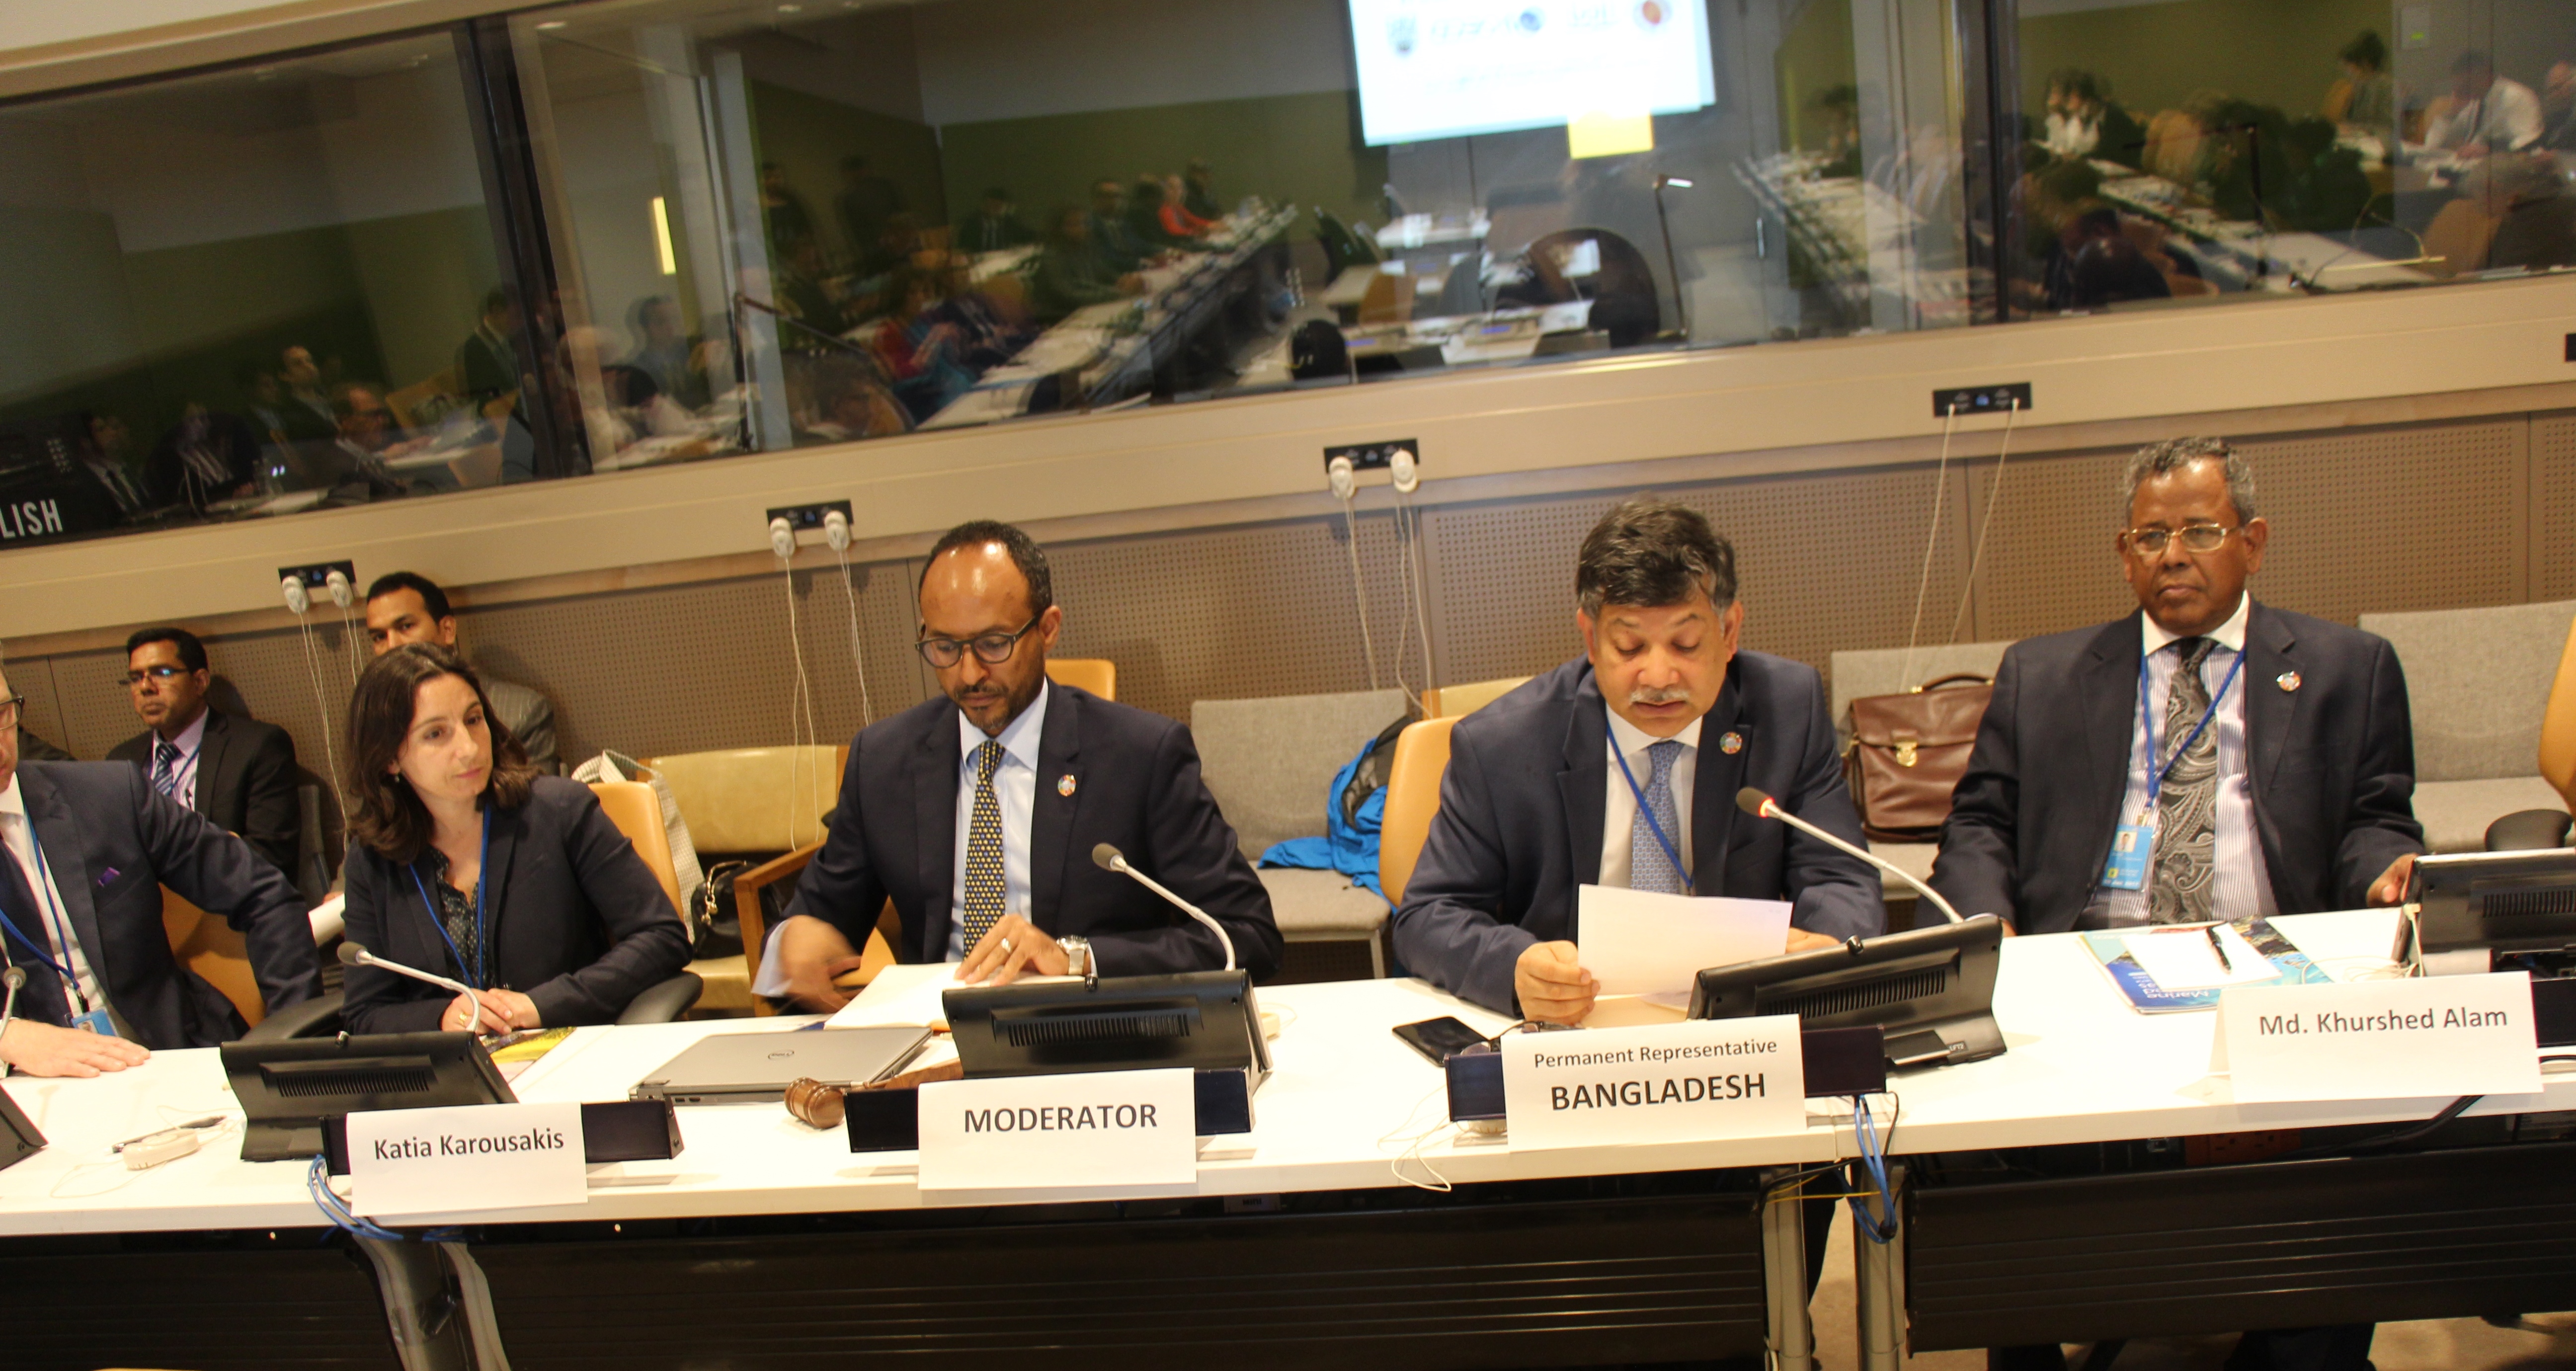 The Ocean Conference : Bangladesh side event on ‘Towards the sustainable blue future: Fiscal incentives to achieve SDG-14’